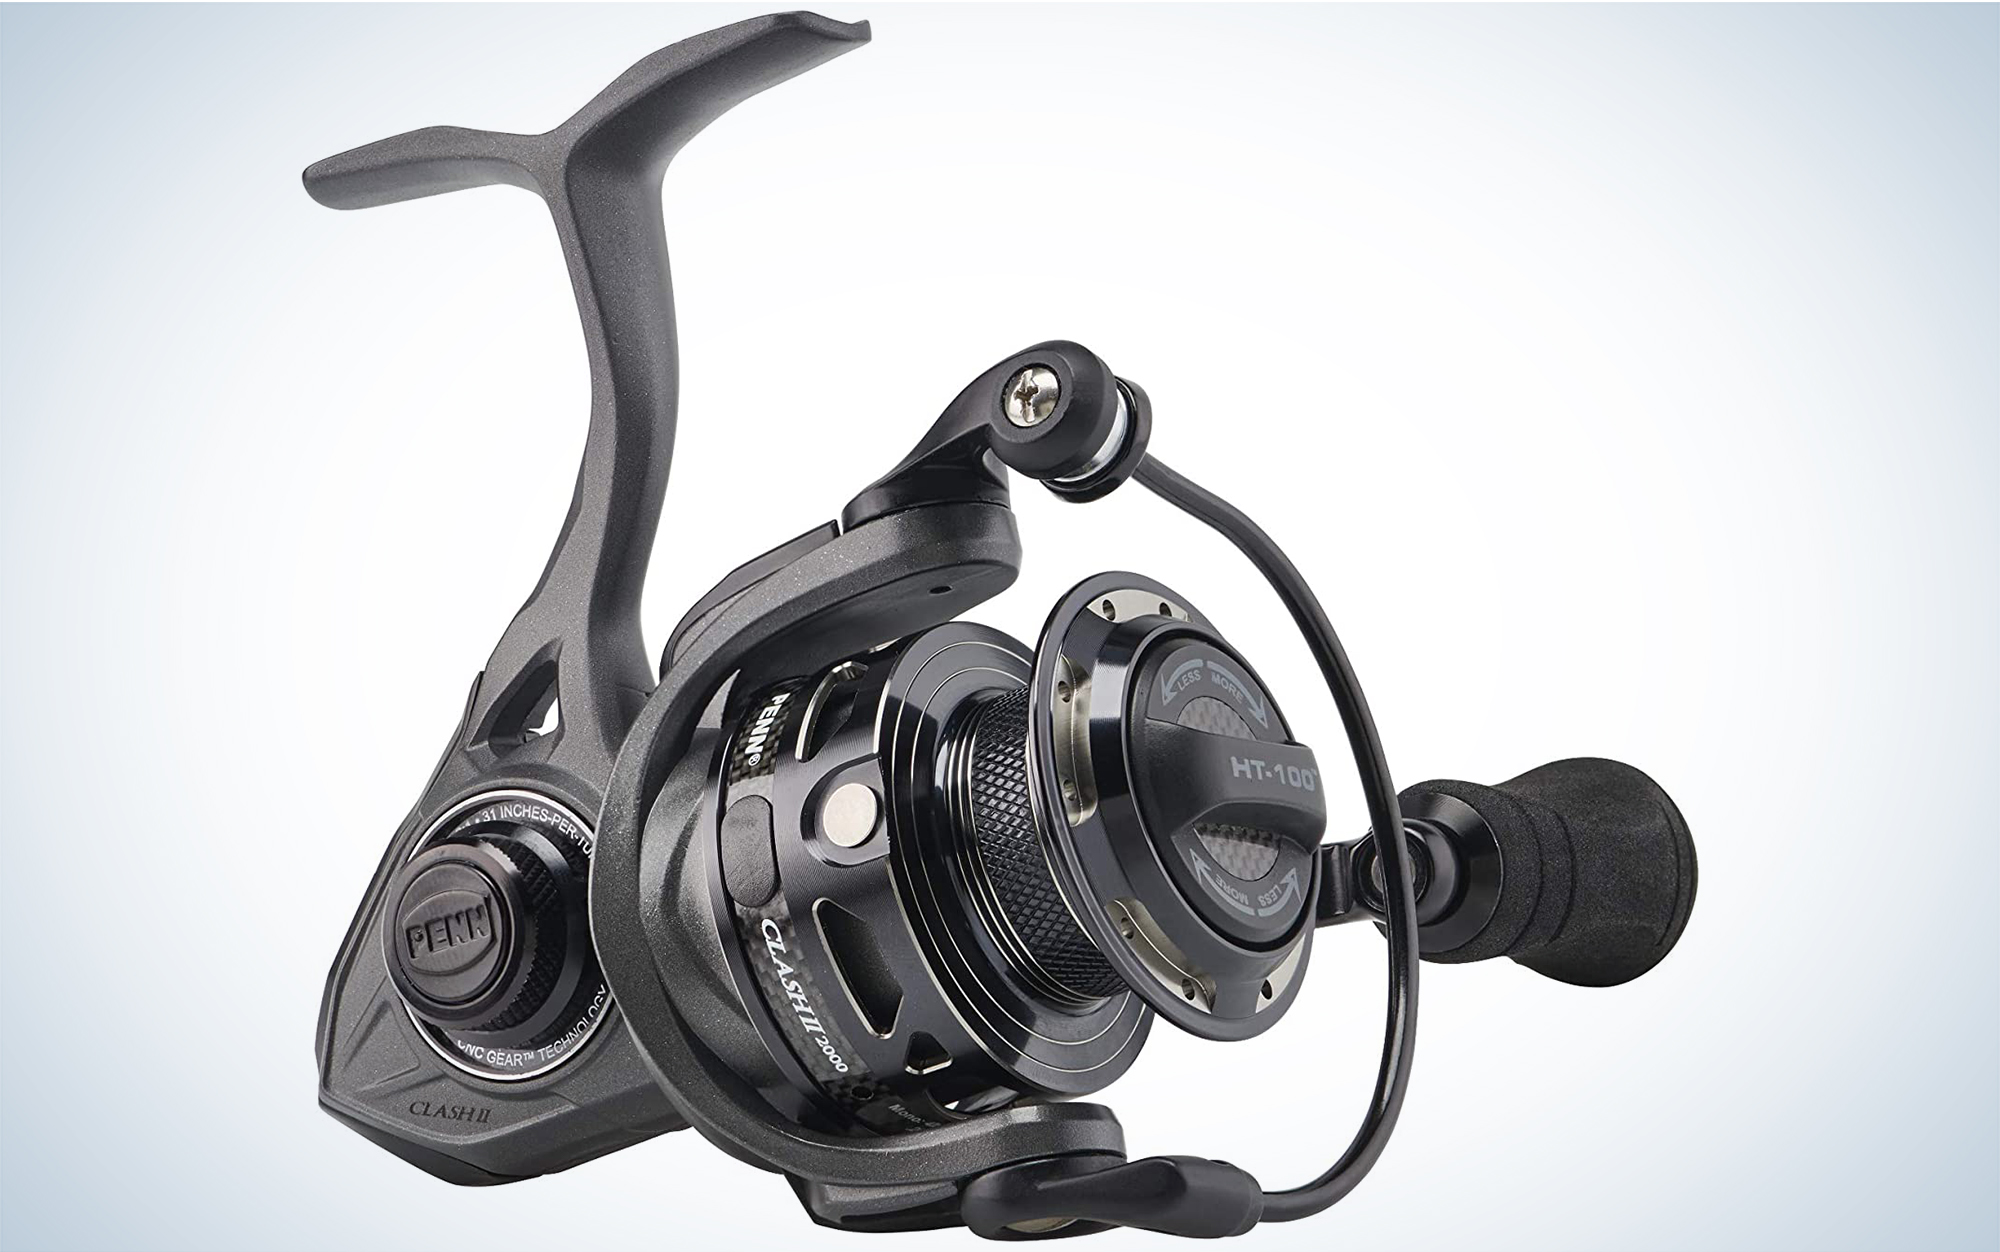 8BB SC Series Wholesale Best Ultralight Spinning Reel With Plastic Base,  Spincast Reeling, And Large Long Wheel Included From Walon123, $11.51